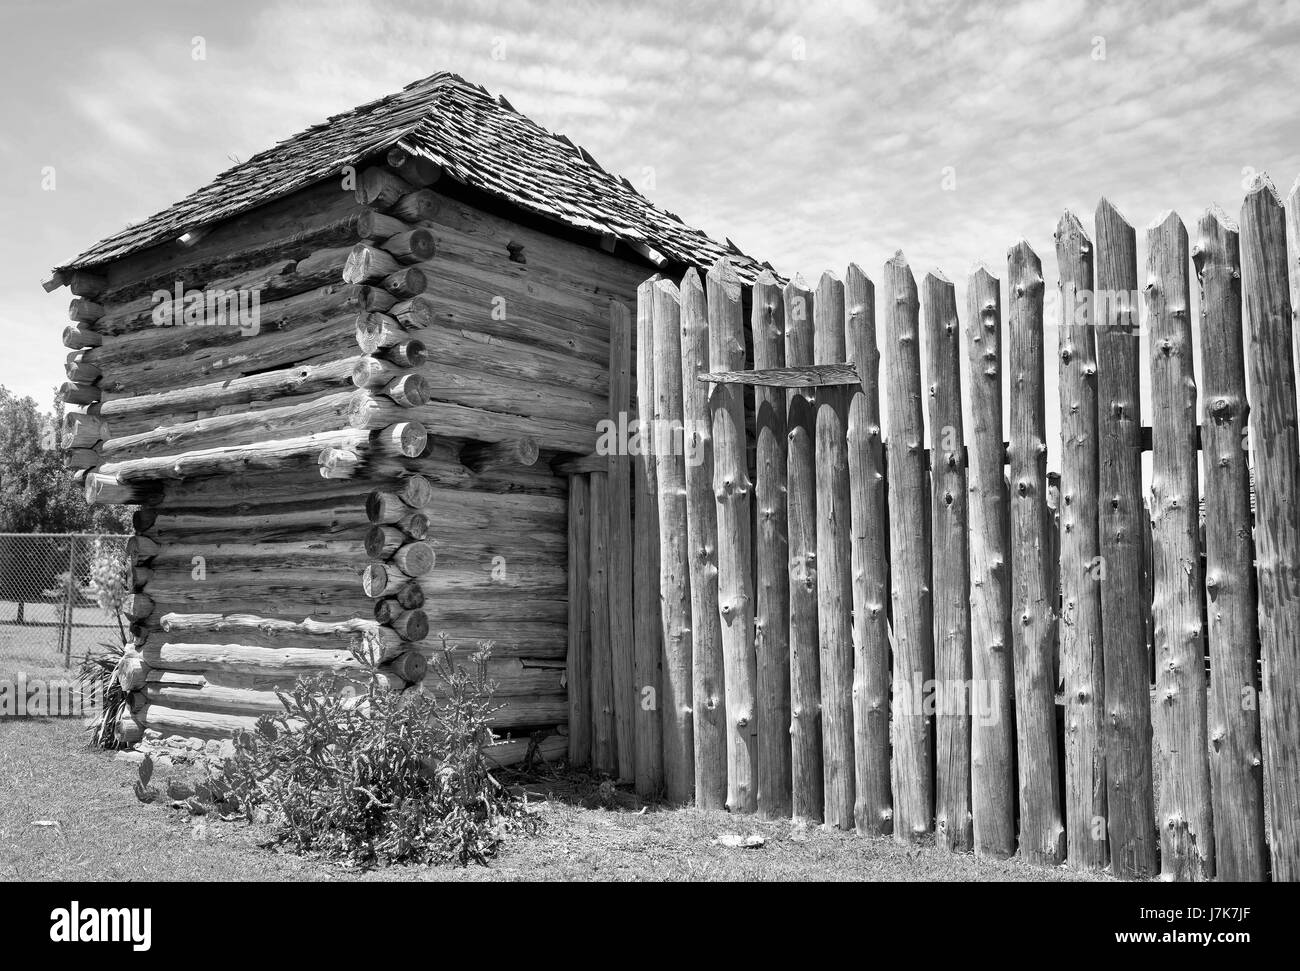 Old Wild West fort in black and white. Stock Photo